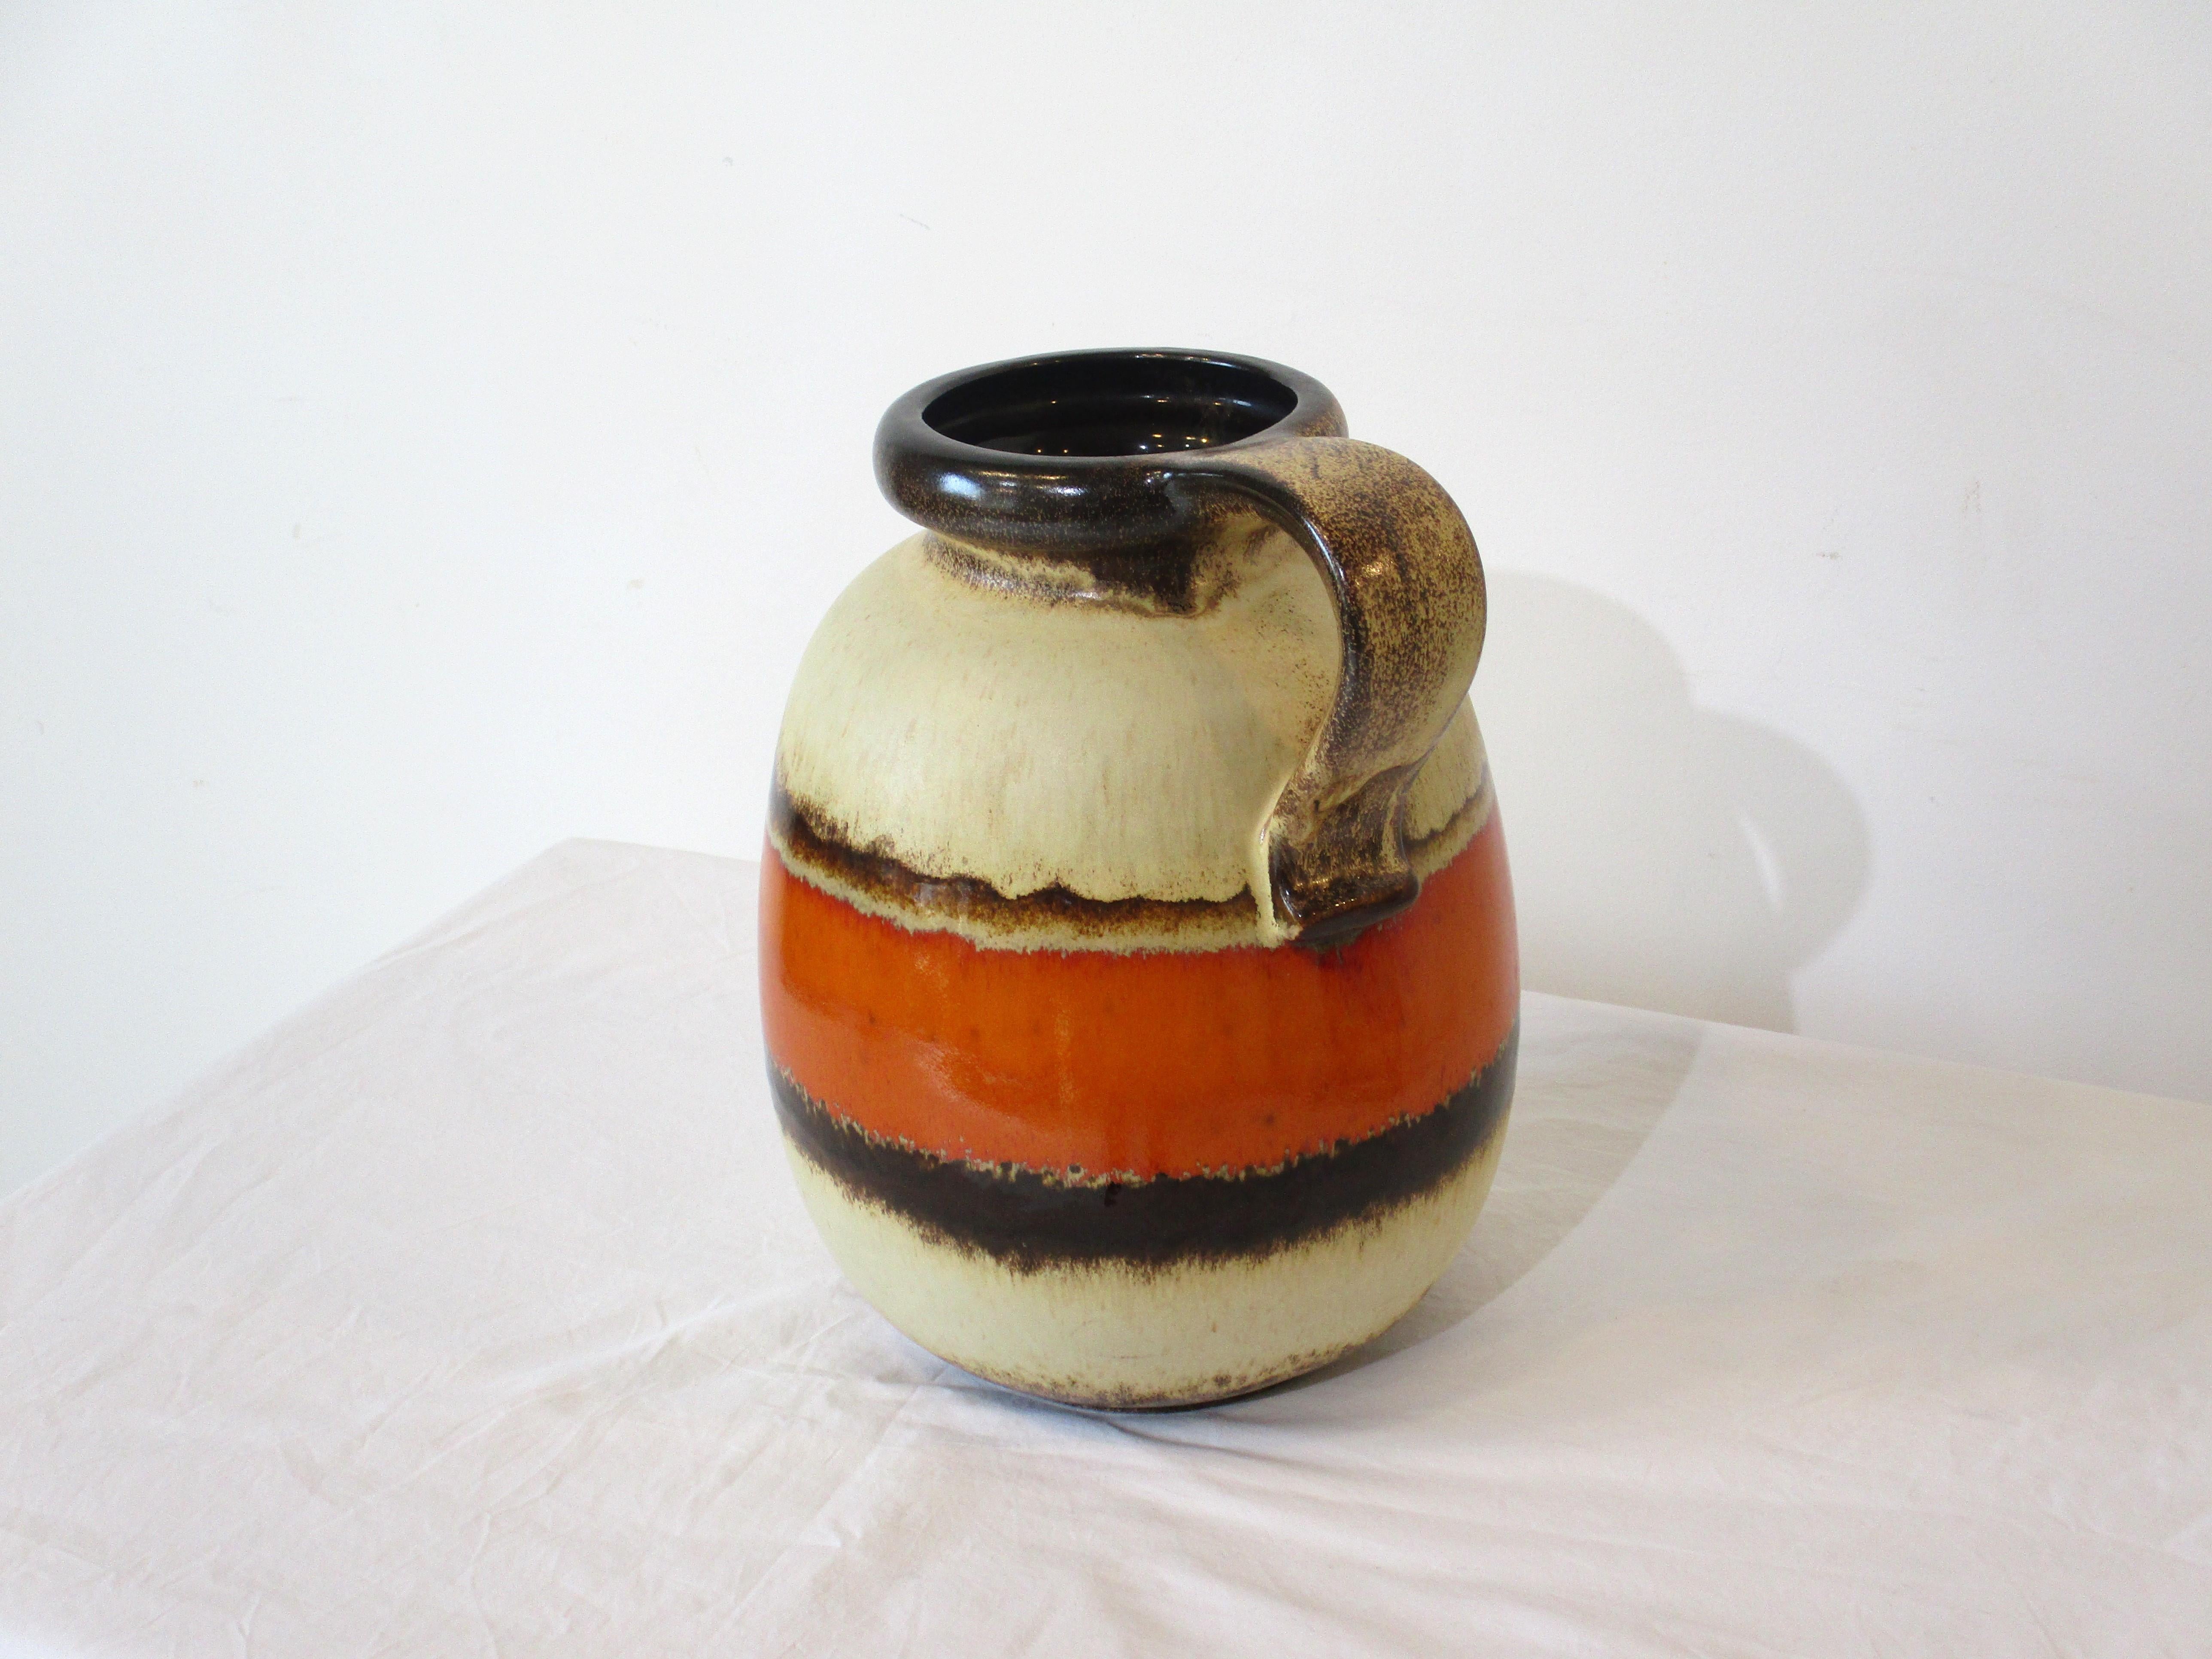 A large Fat Lava jug vase with tan body, brown, dark brown and orange glaze having splater details. The curved handle to the top and rounded opening make for an interesting centerpiece just as is or with your favorite flowers. Retains the original